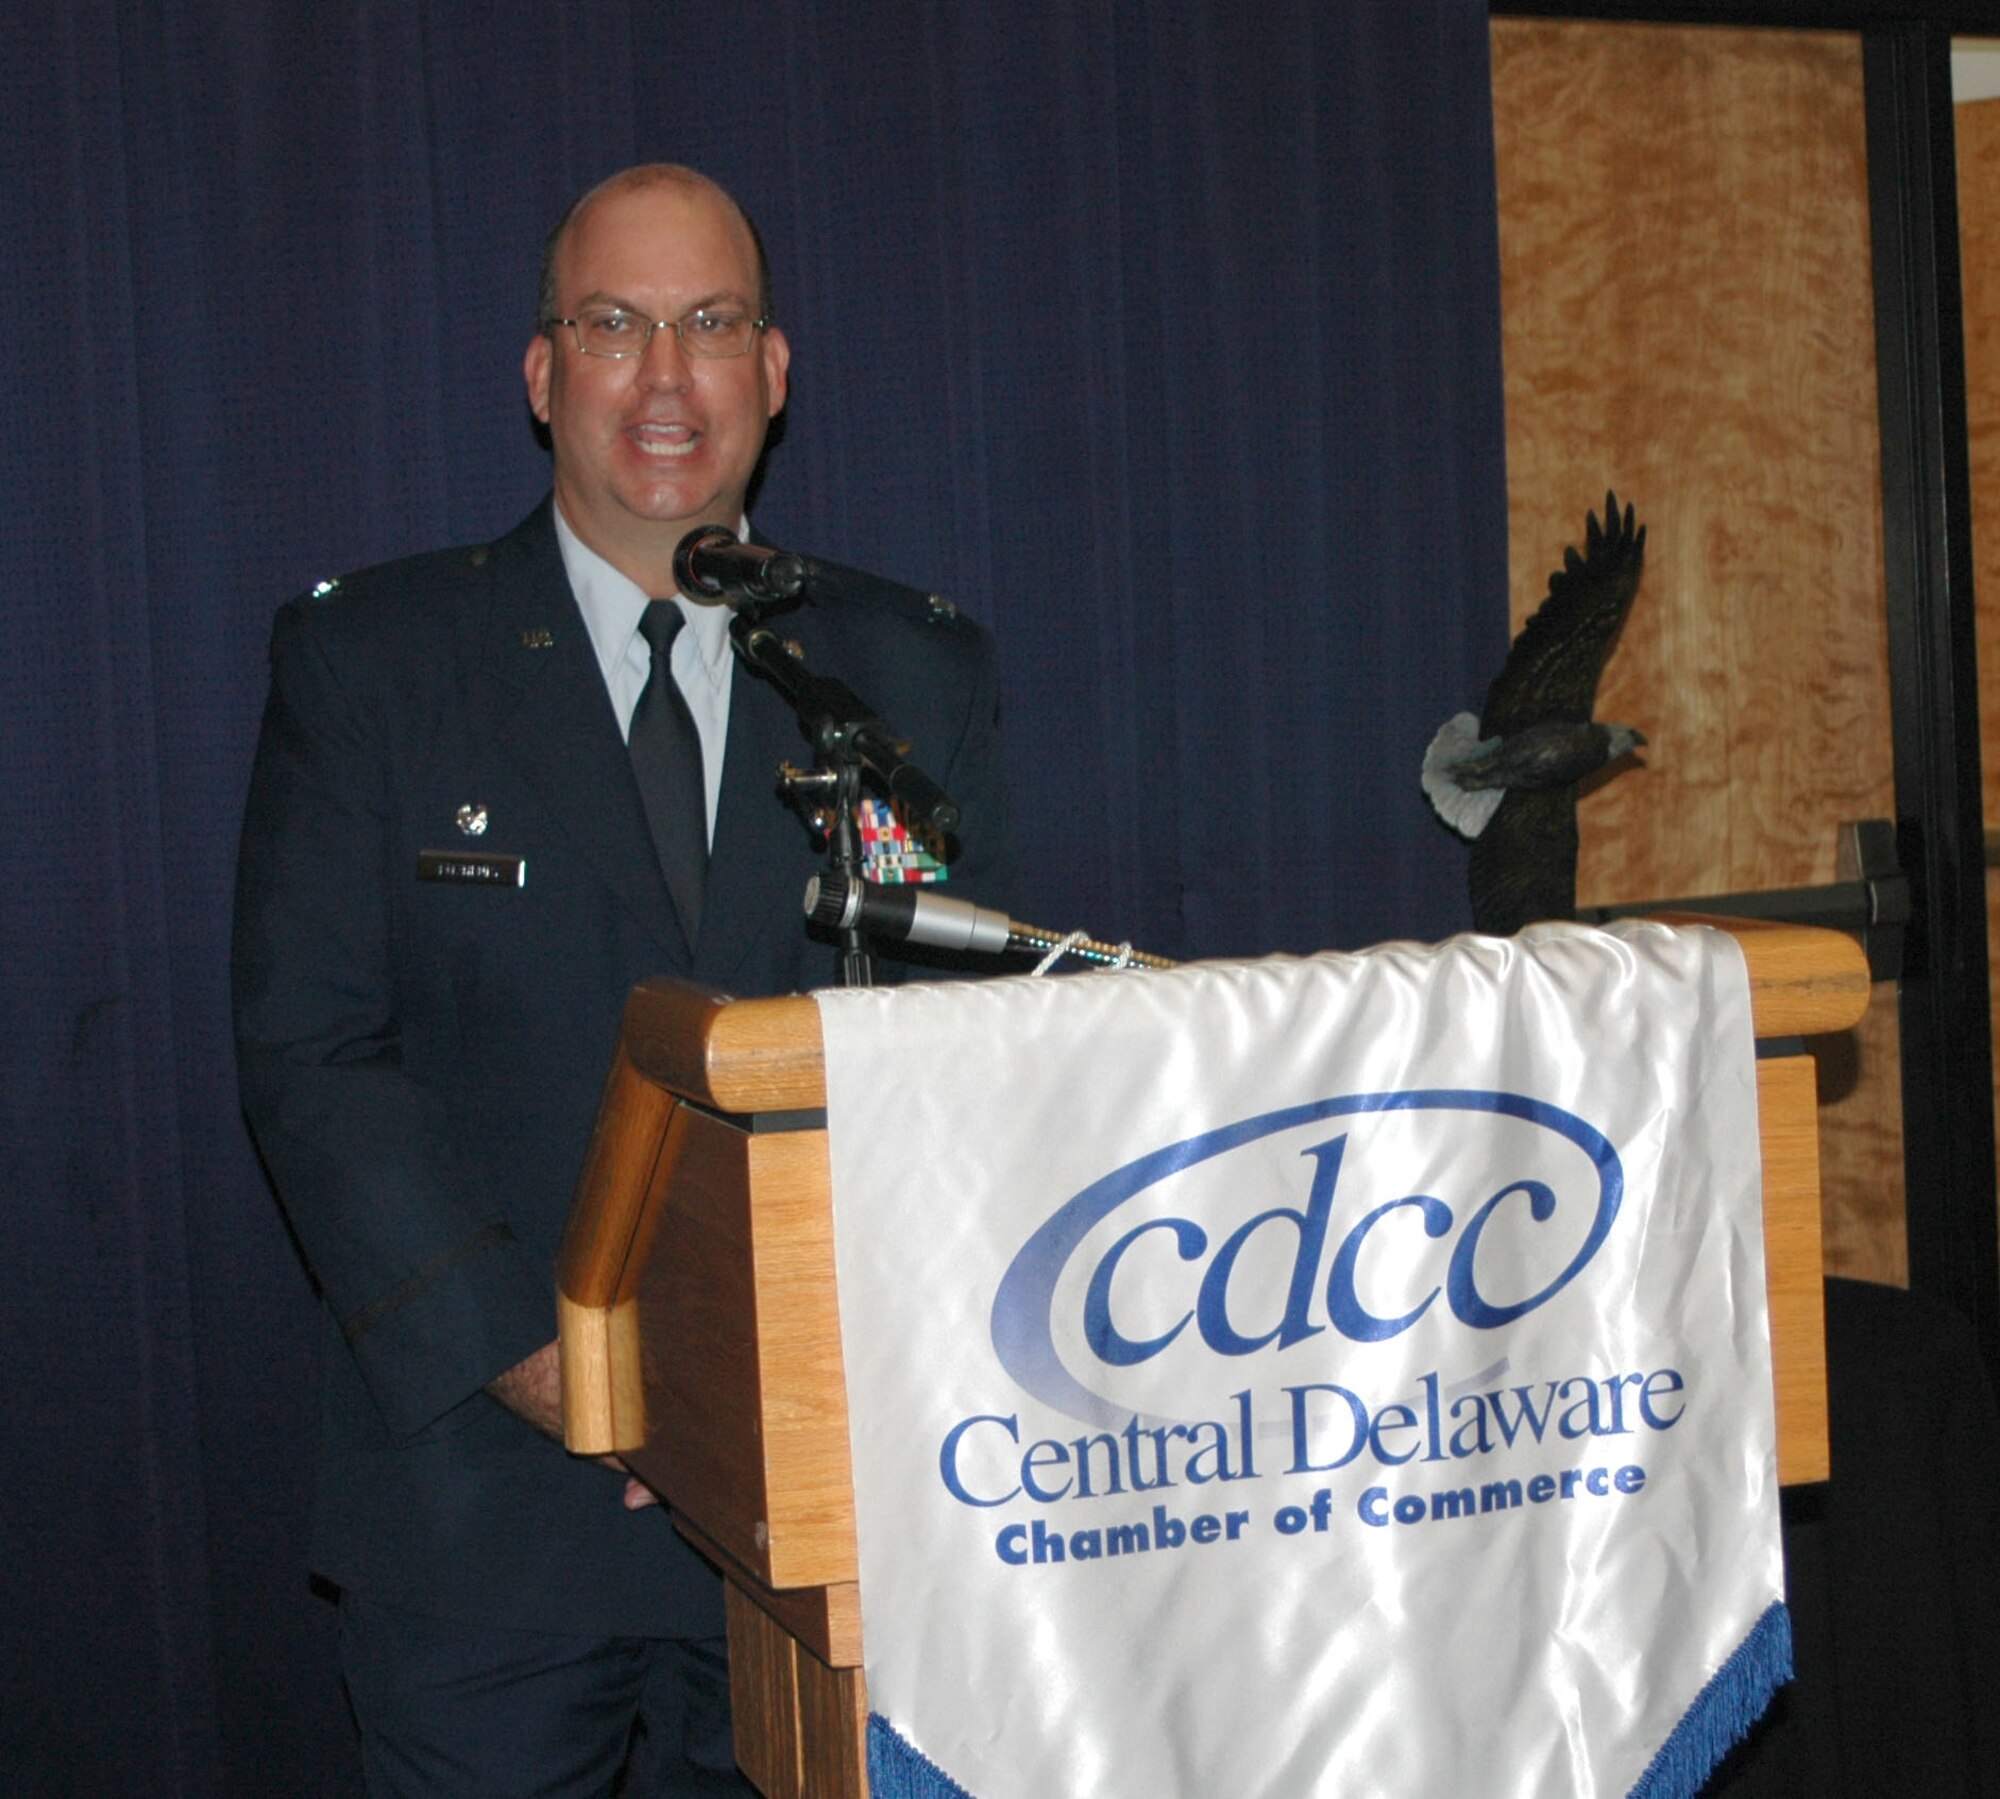 Col. Michael T. Fitzhenry, 512th Airlift Wing commander, addresses base and community leaders at the Military Affaire at The Landings here Nov. 4. This annual event is hosted by the Central Delaware Chamber of Commerce and the Air Force Association's Galaxy Chapter. (U.S. Air Force photo/Capt. Marnee A.C. Losurdo)
